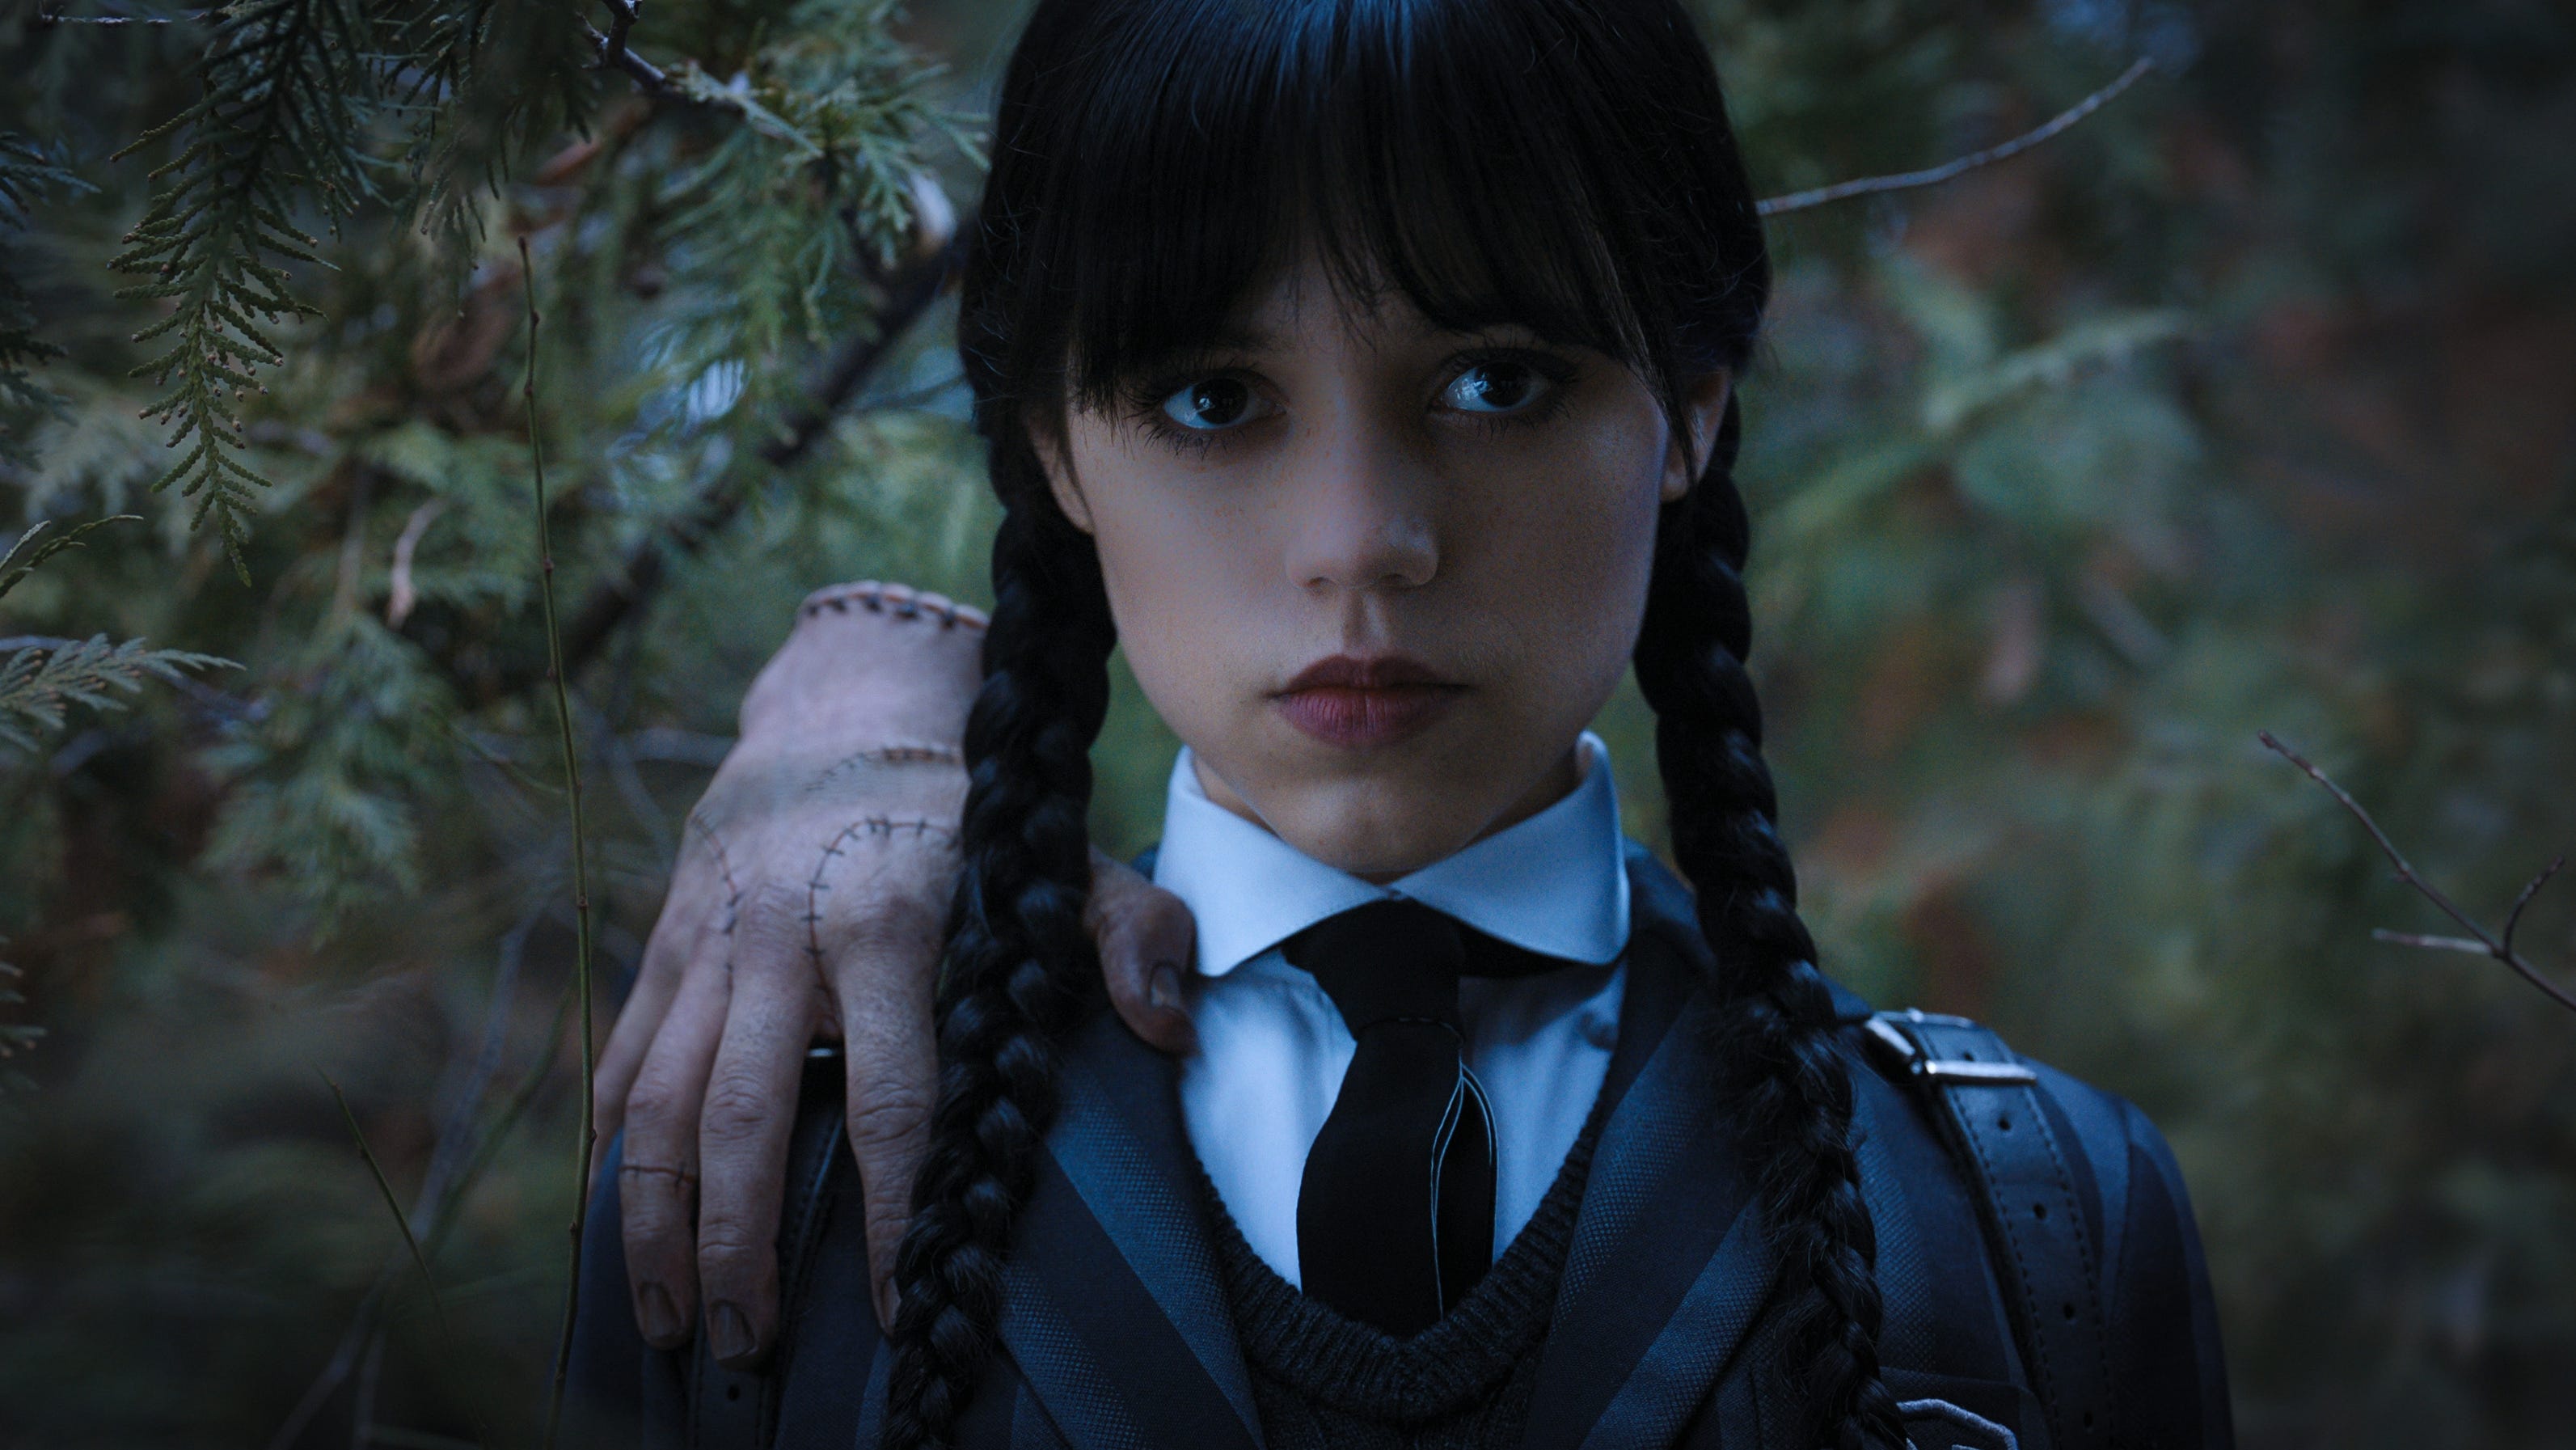 Jenna Ortega takes on the iconic role of Wednesday Addams in Netflix's new Tim Burton-directed teen series, "Wednesday."